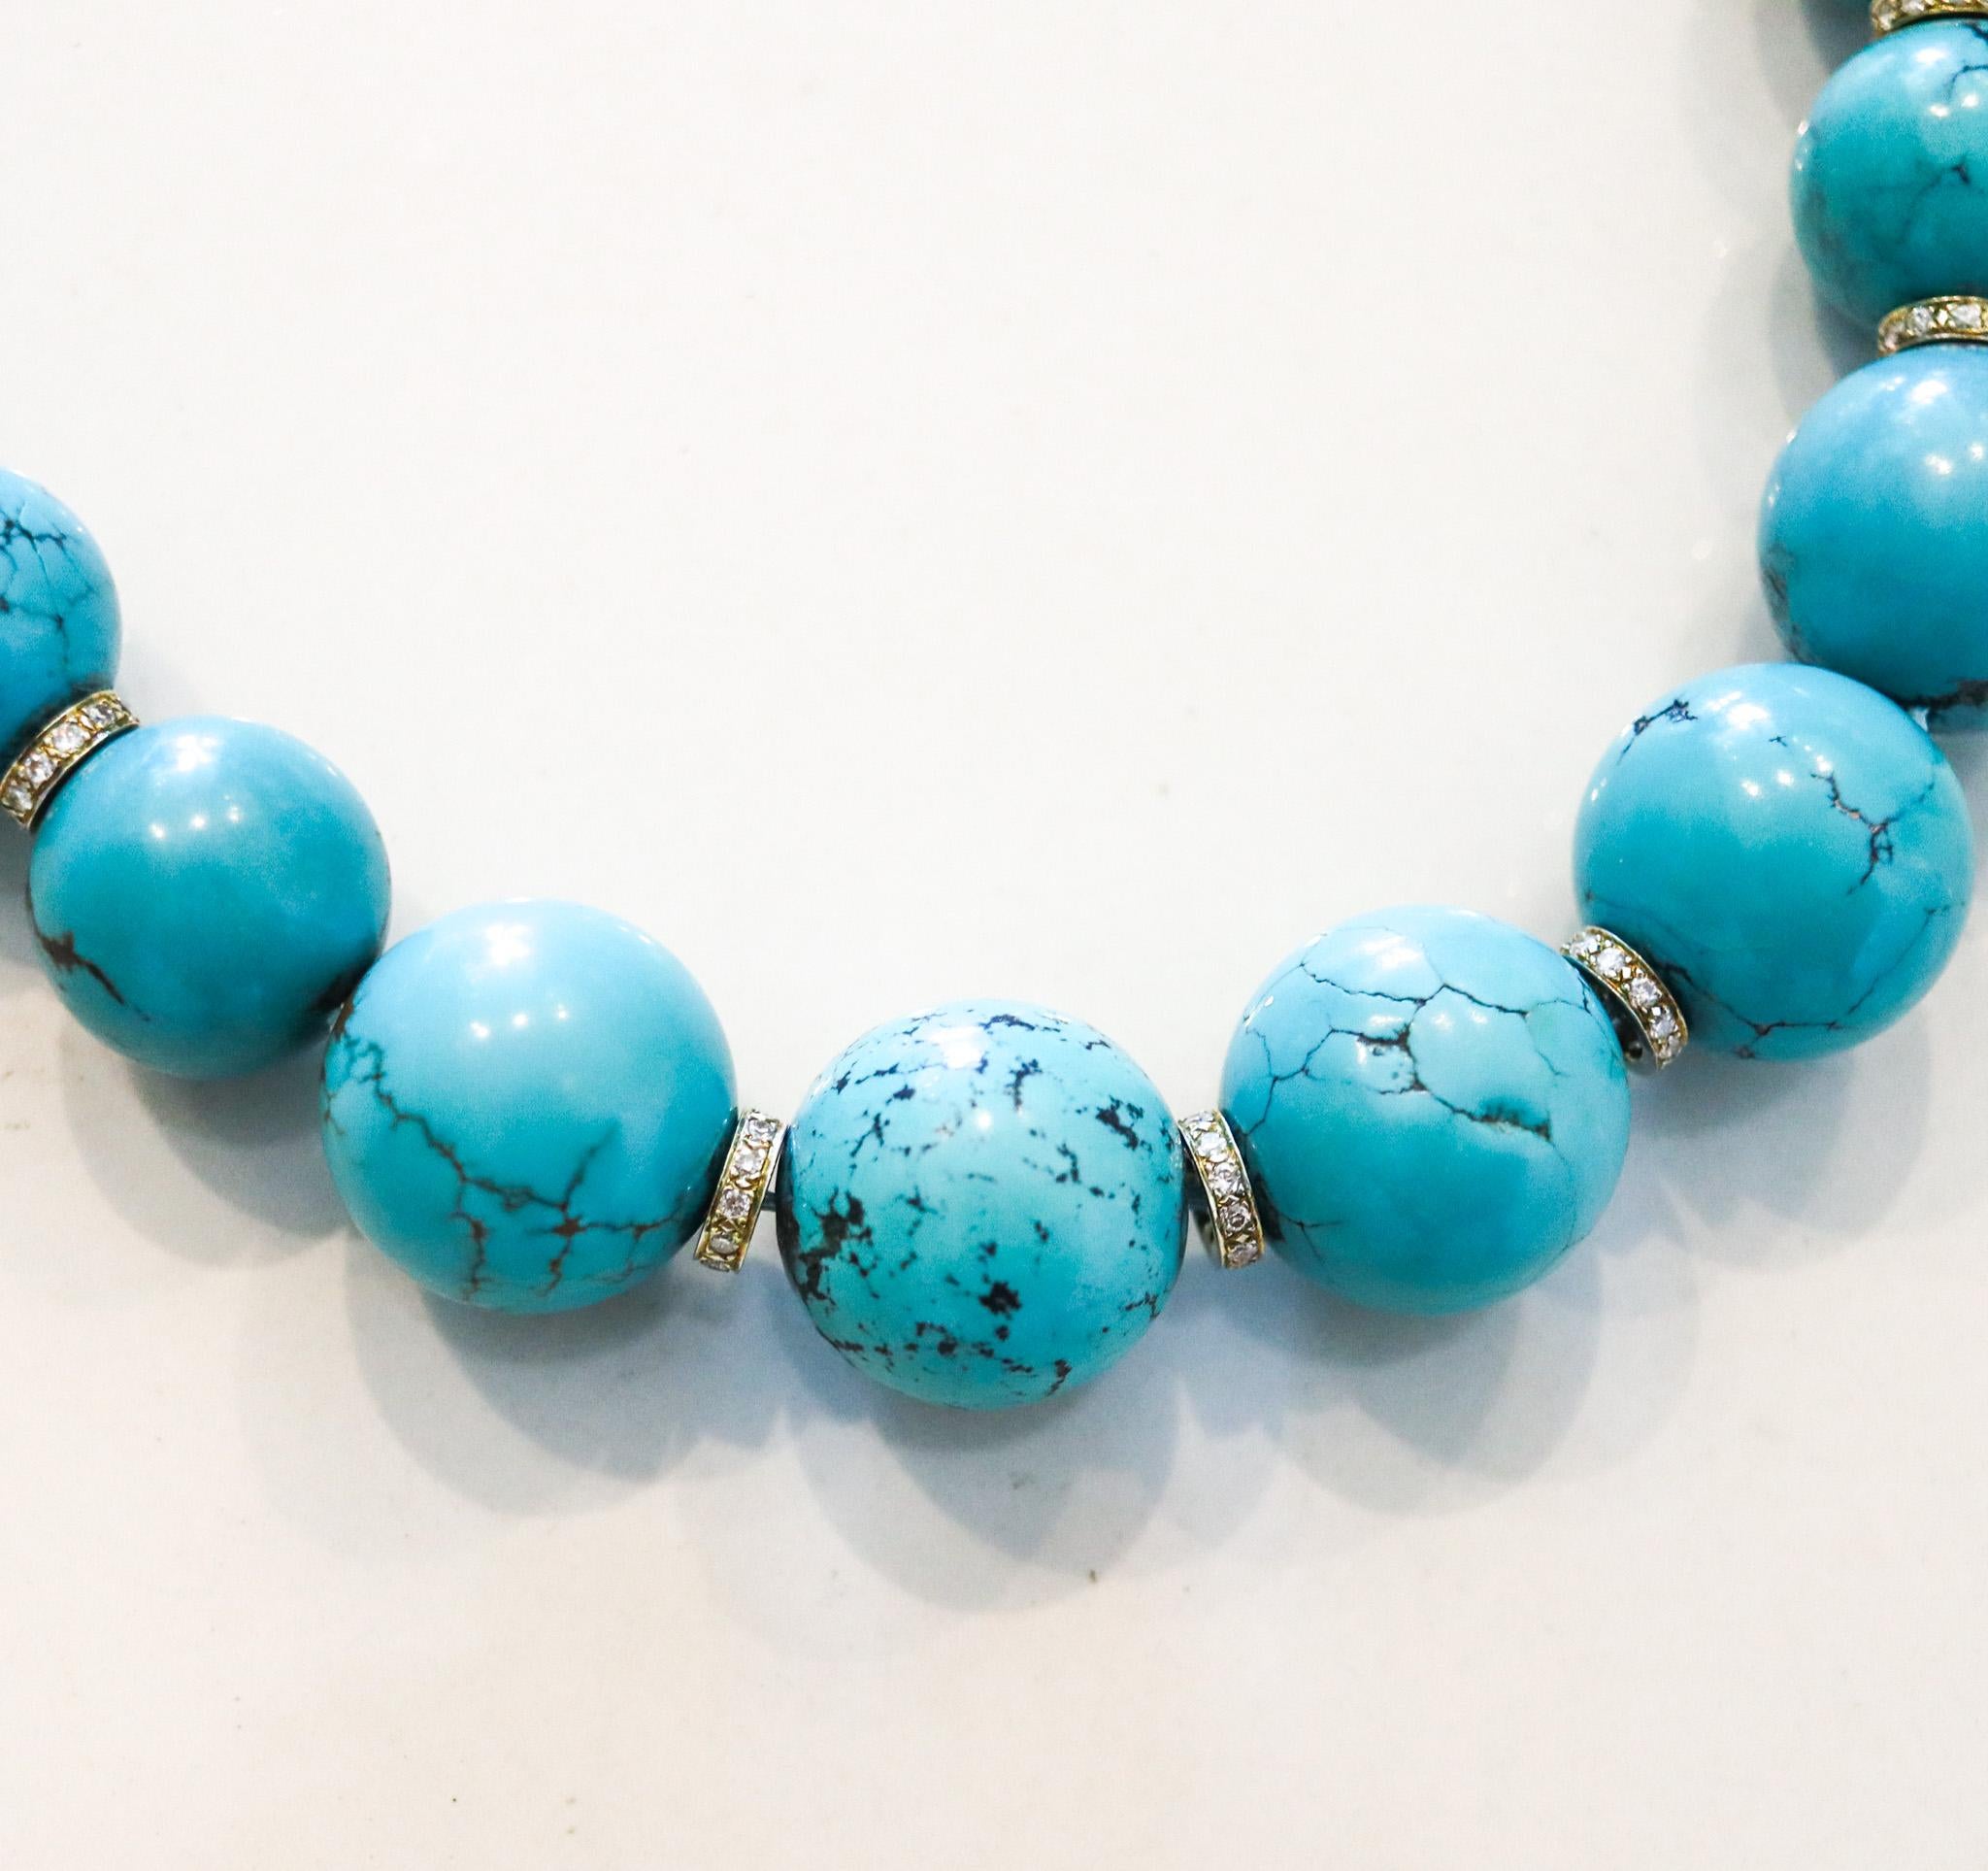 Graduated long turquoise necklace designed by Nani Cesare.

Fabulous statement long necklace, created in Alessandria Italy at the jewelry atelier of Nani Cesare, back in the 1970. This great necklace is composed by forty-two graduated beads of blue